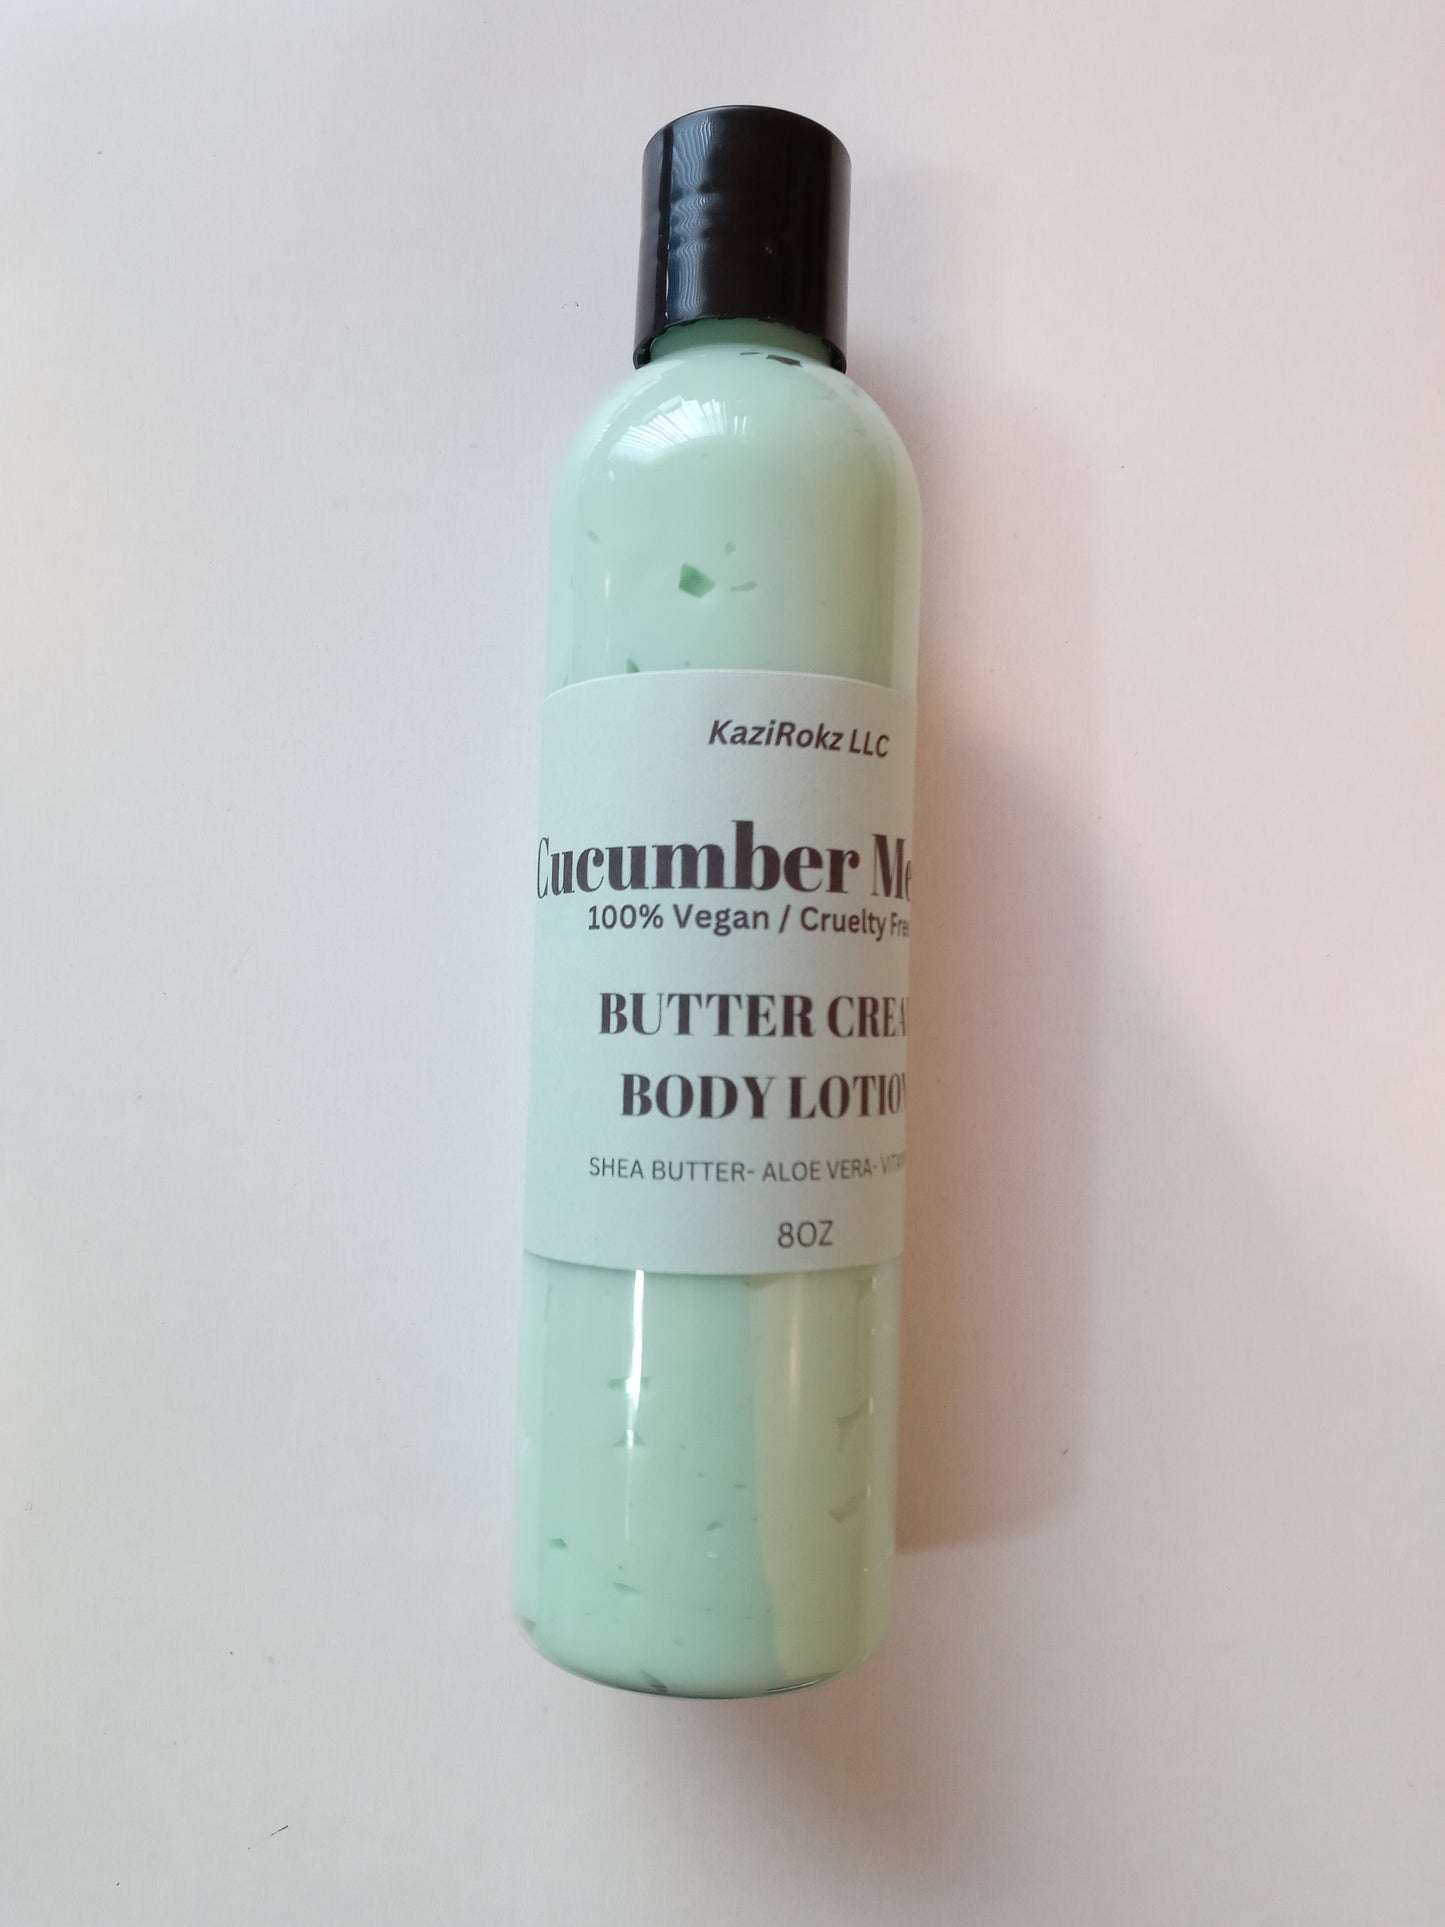 Cucumber Melon Butter Cream Body Lotion 8oz. 100% Vegan/ Cruelty Free. Ultra hydrating and moisturizing for extremely dry skin. Eczema and psoriasis treatment.